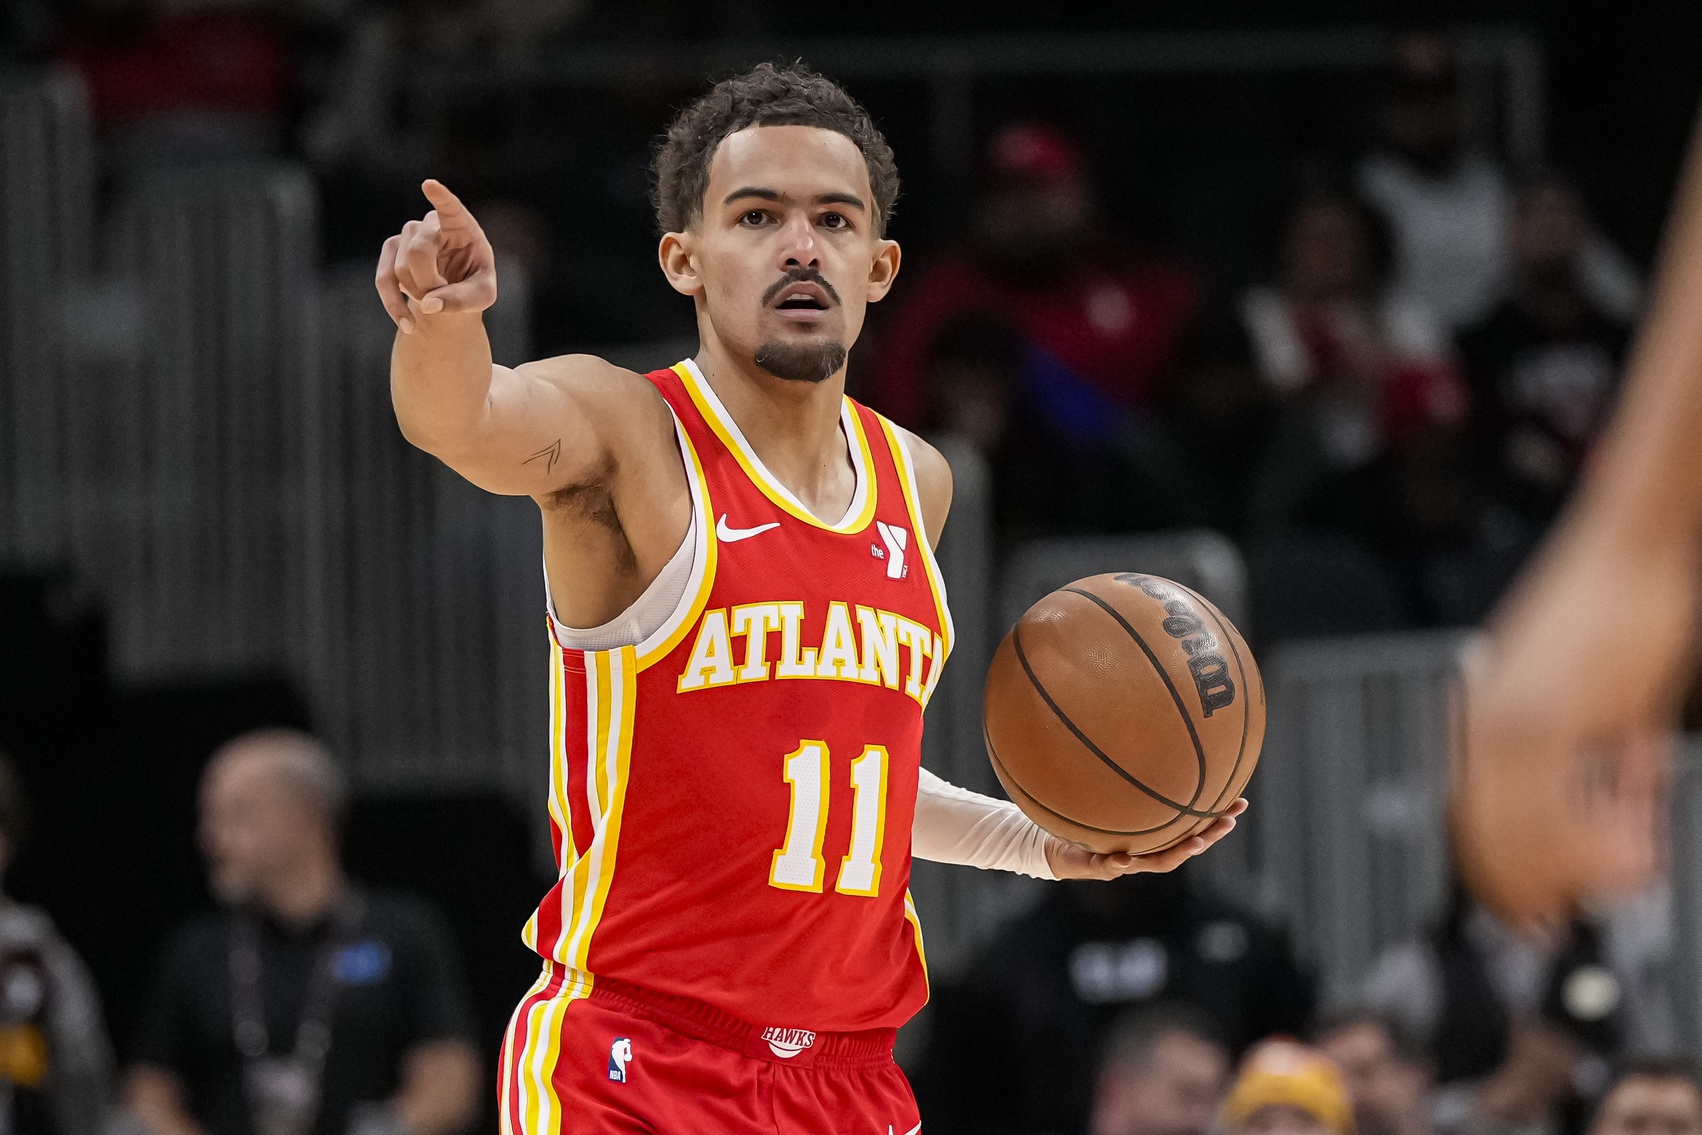 Atlanta Hawks guard Trae Young (11) points to a teammate against the Toronto Raptors during the first half at State Farm Arena.